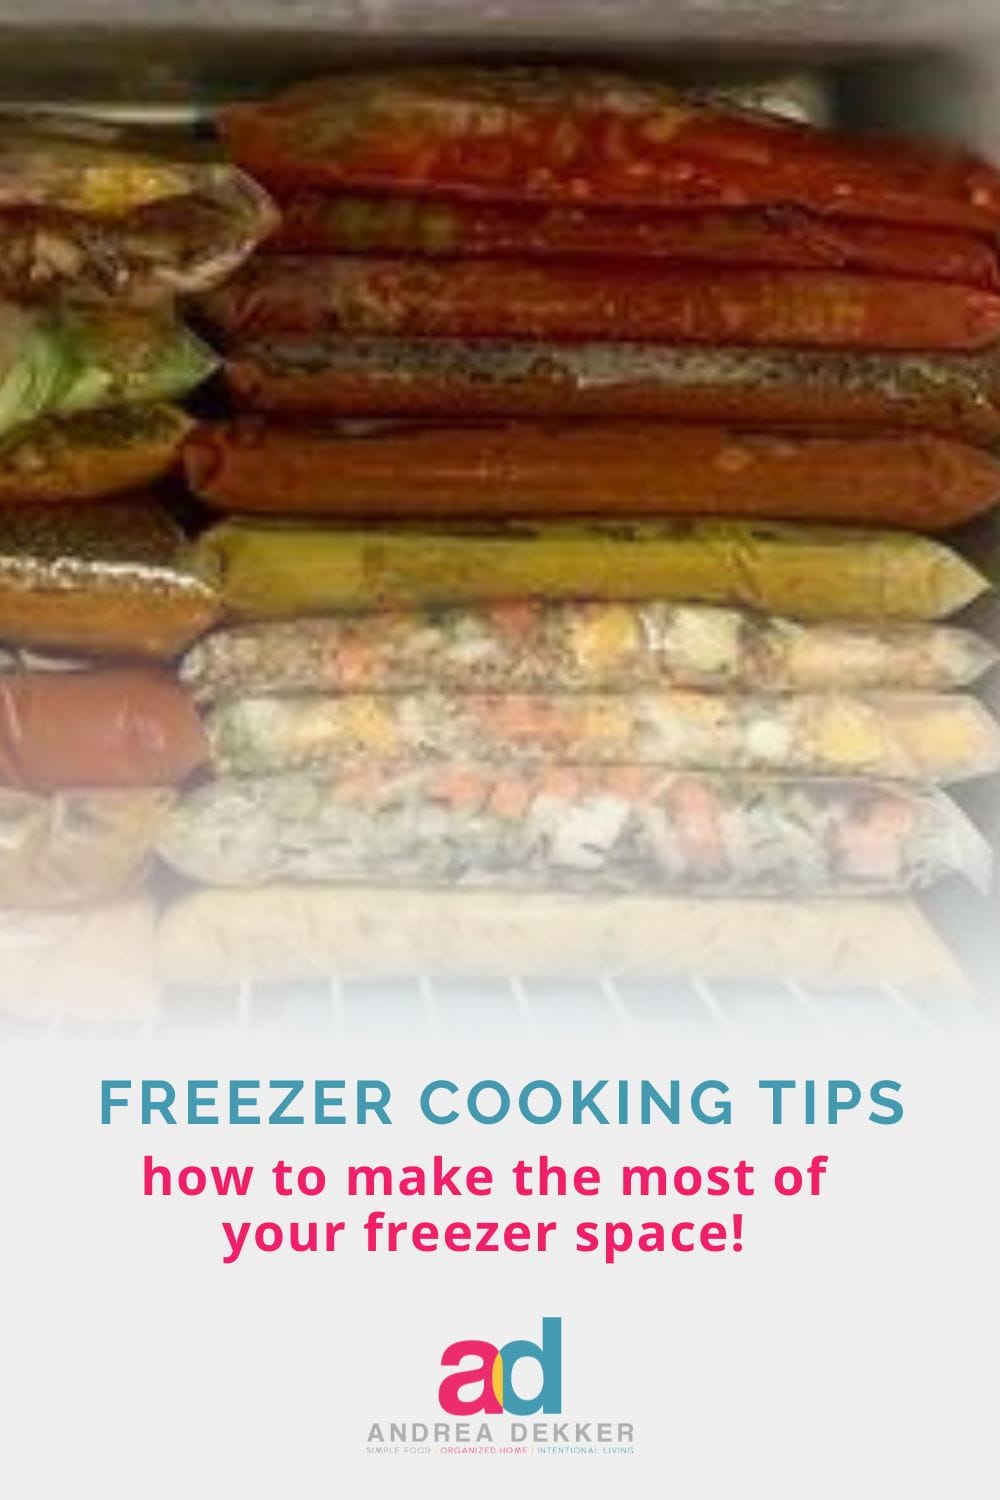 Winter is a great time to do a little extra cooking and baking to stock your freezer -- and I've got a few tips that will help you save time and space! via @andreadekker